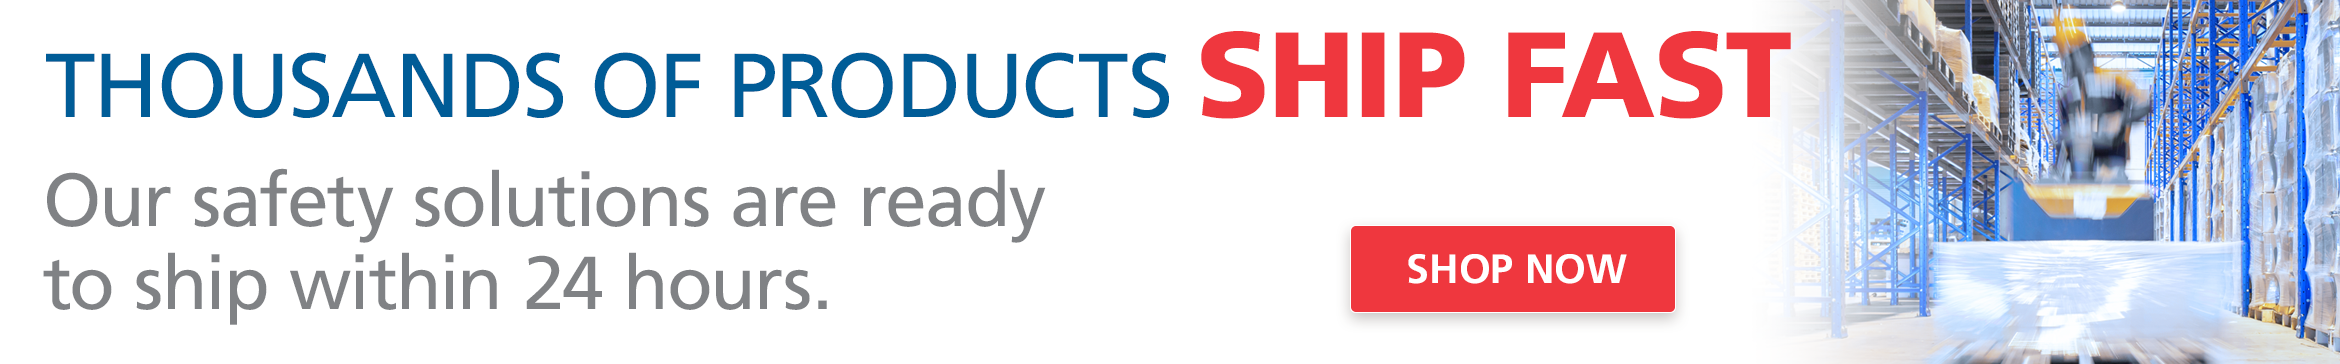 Click to shop thousands of safety solutions ready to quickly ship within 24 hours.